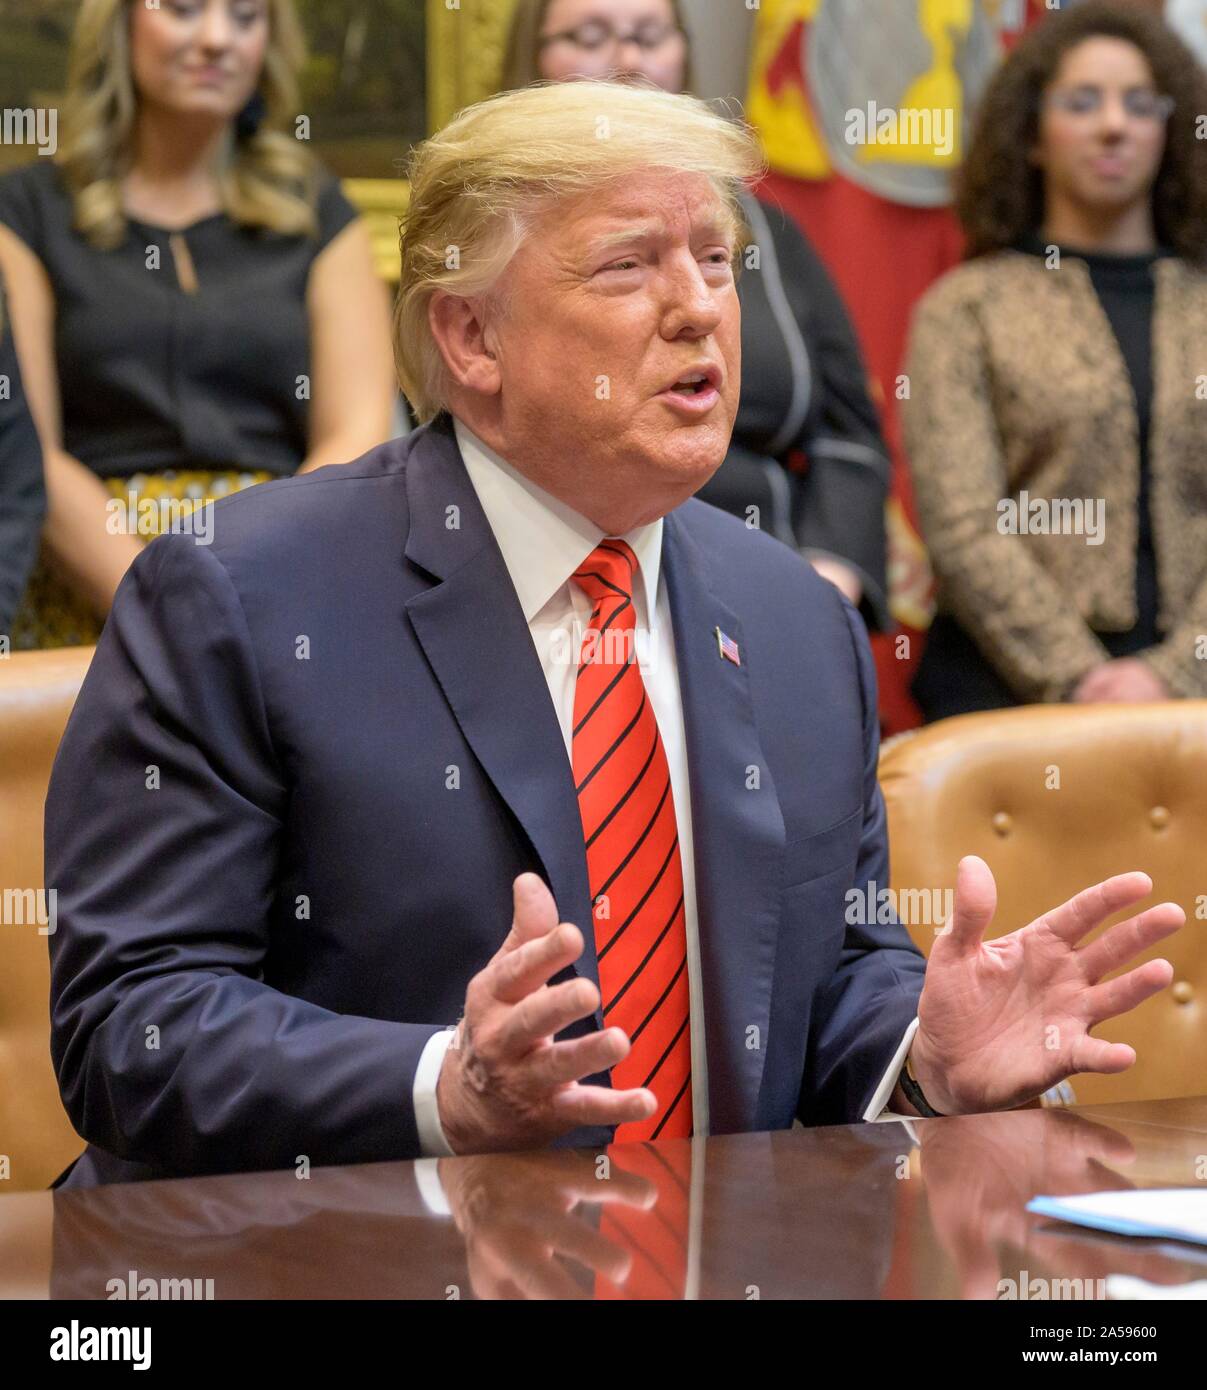 Washington, United States of America. 18 October, 2019. U.S. President Donald Trump speaks to astronauts Christina Koch and Jessica Meir by video-link prior to their all-woman spacewalk from the Roosevelt Room of the White House October 18, 2019 in Washington, DC. Credit: Bill Ingalls/NASA/Alamy Live News Stock Photo